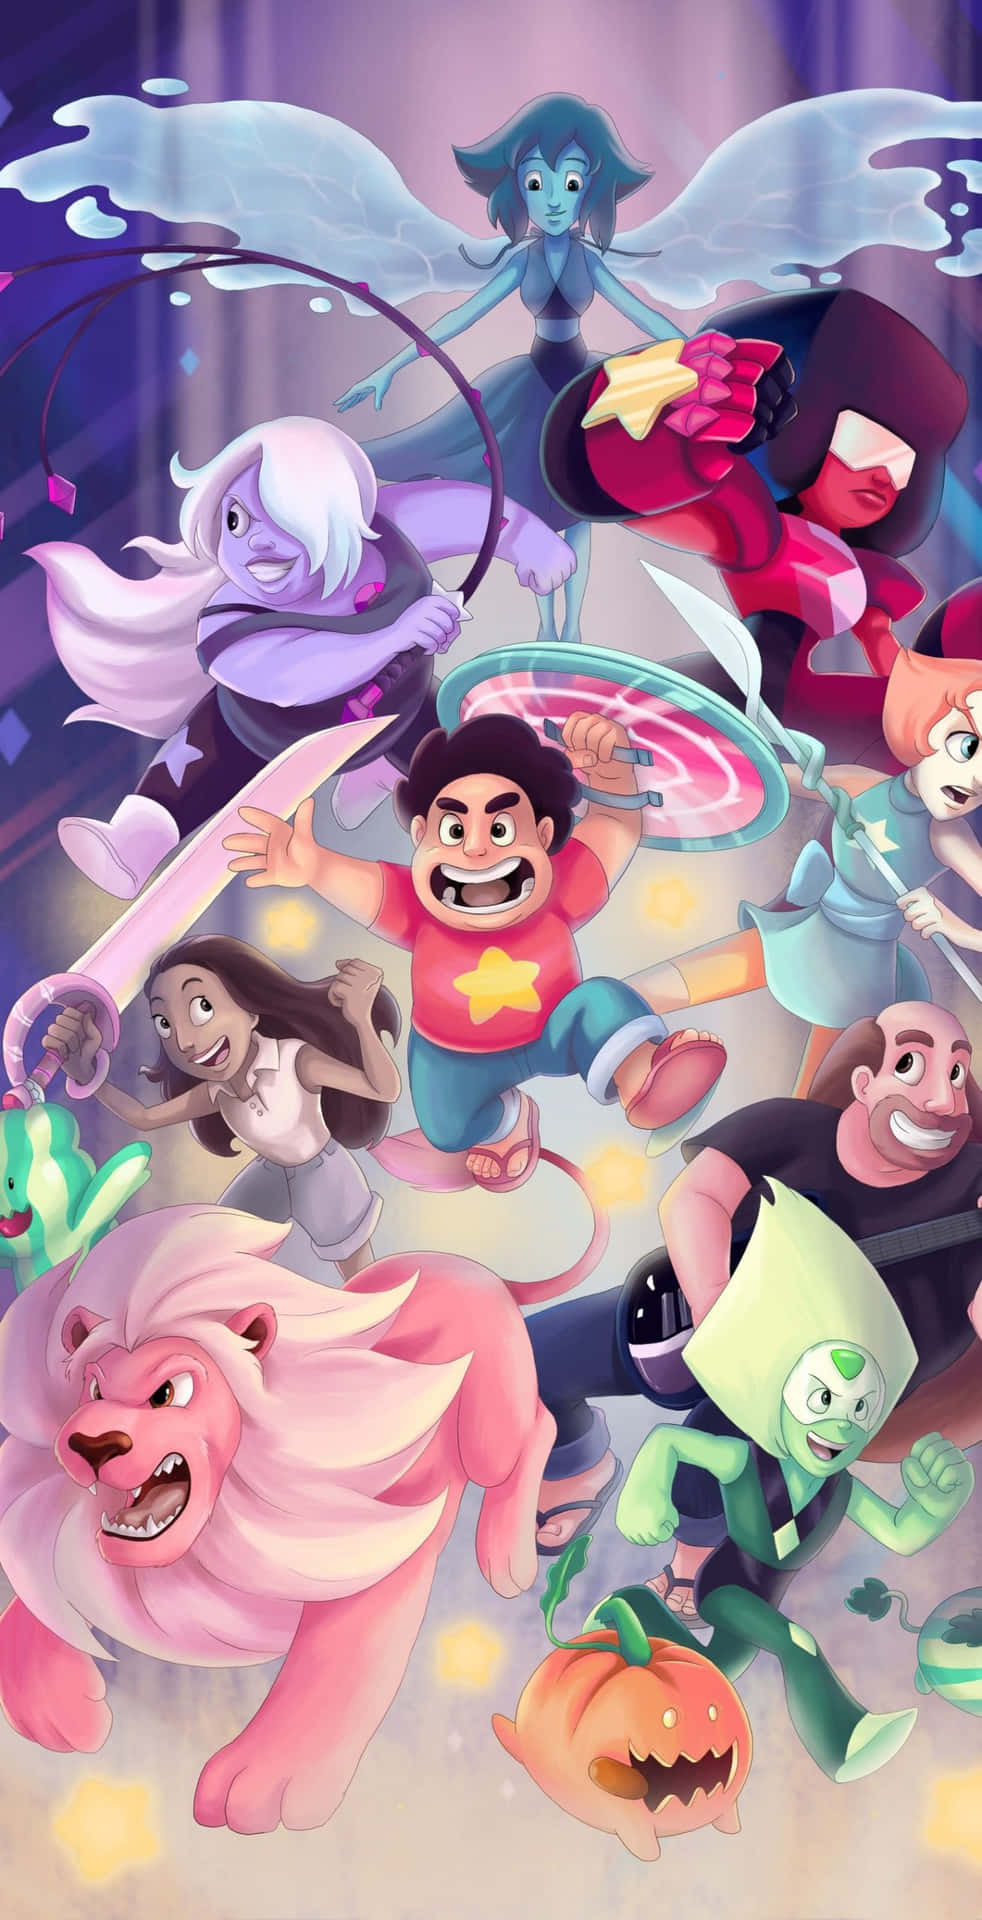 Stay connected with Steven Universe Wallpaper